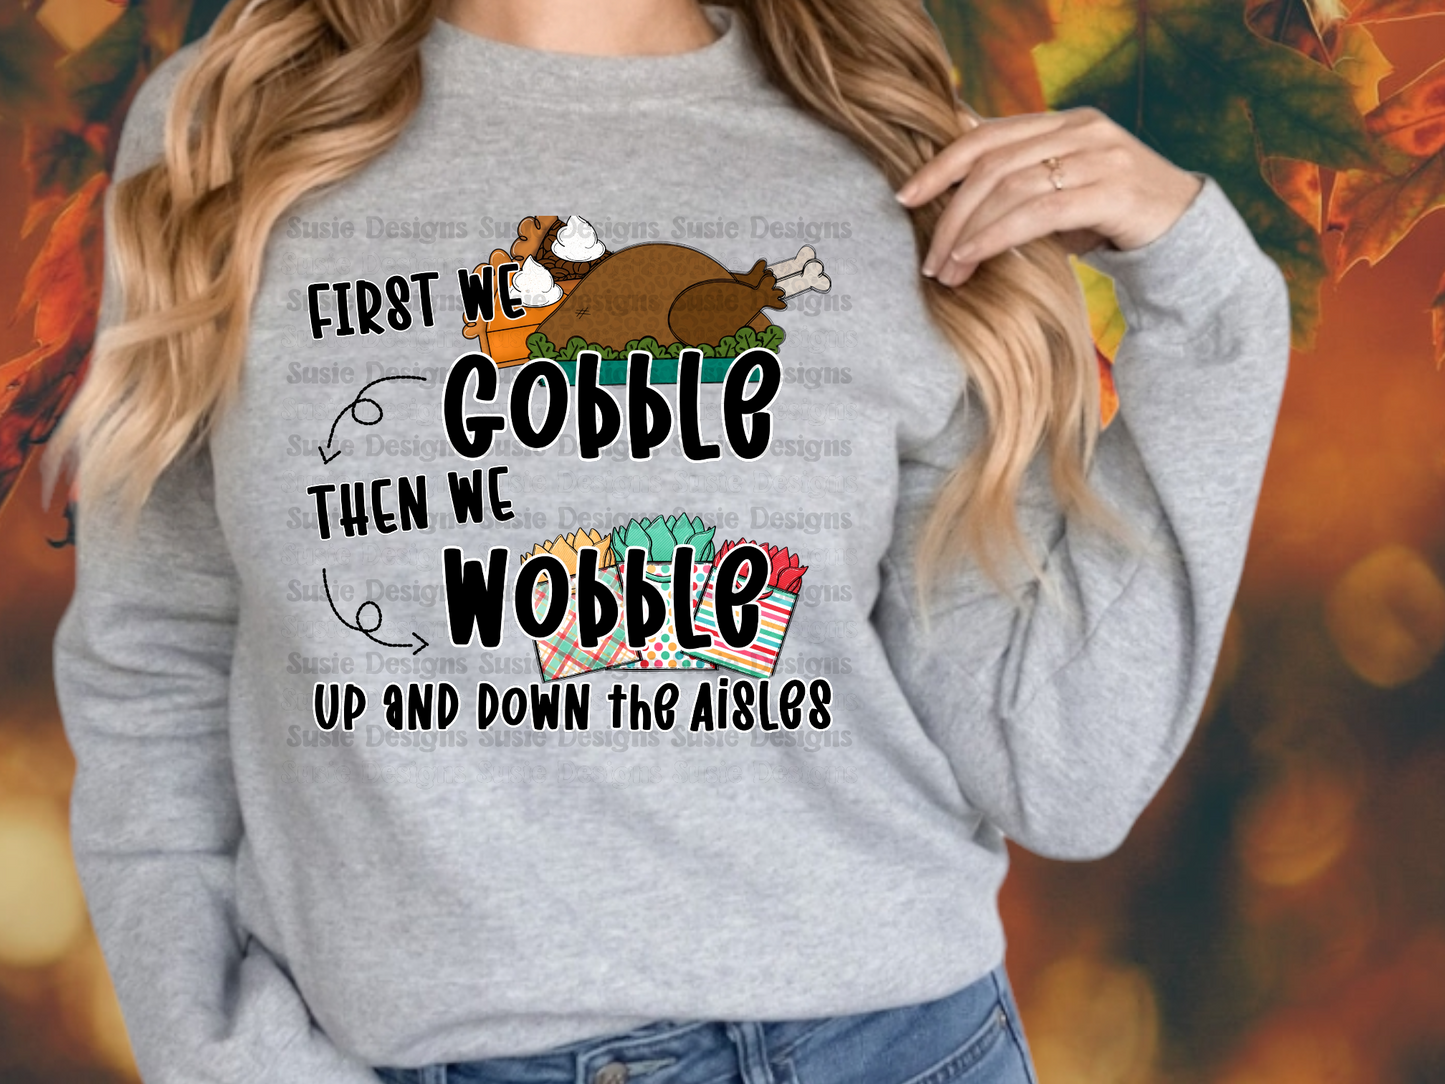 FIRST WE GOBBLE THEN WE WOBBLE